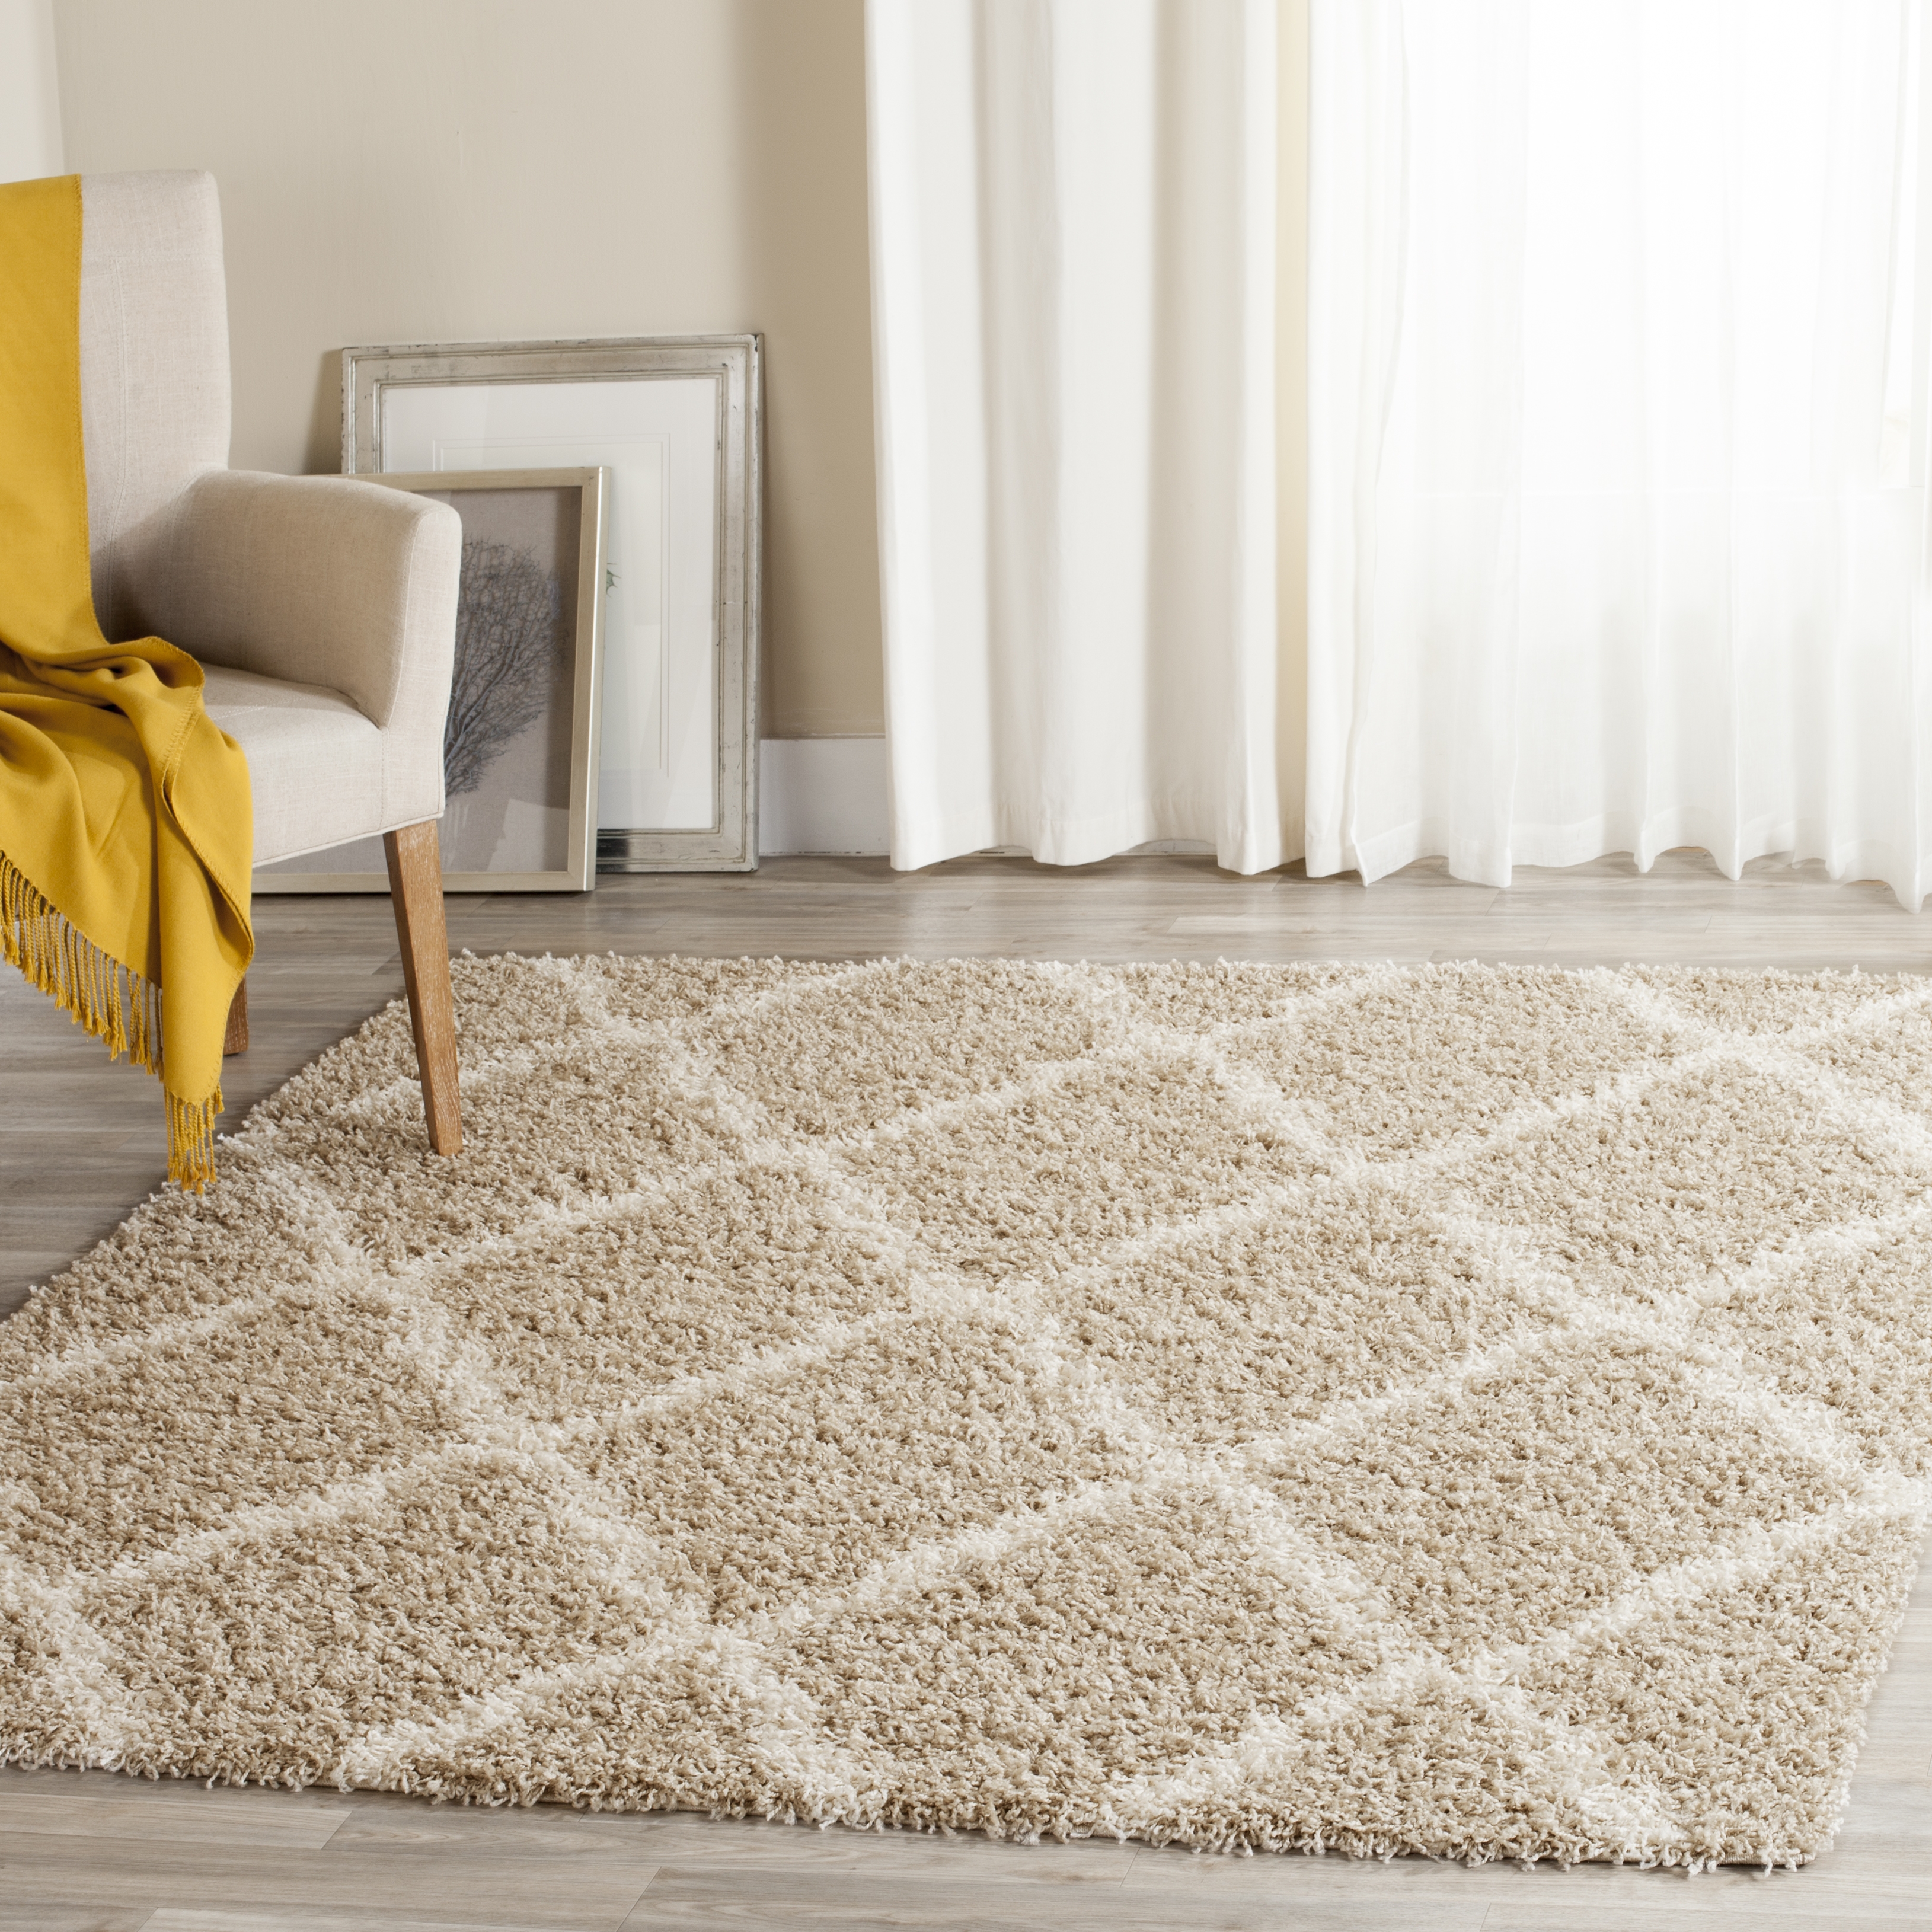 Arlo Home Woven Area Rug, SGD257D, Beige/Ivory,  6' X 6' Square - Image 1